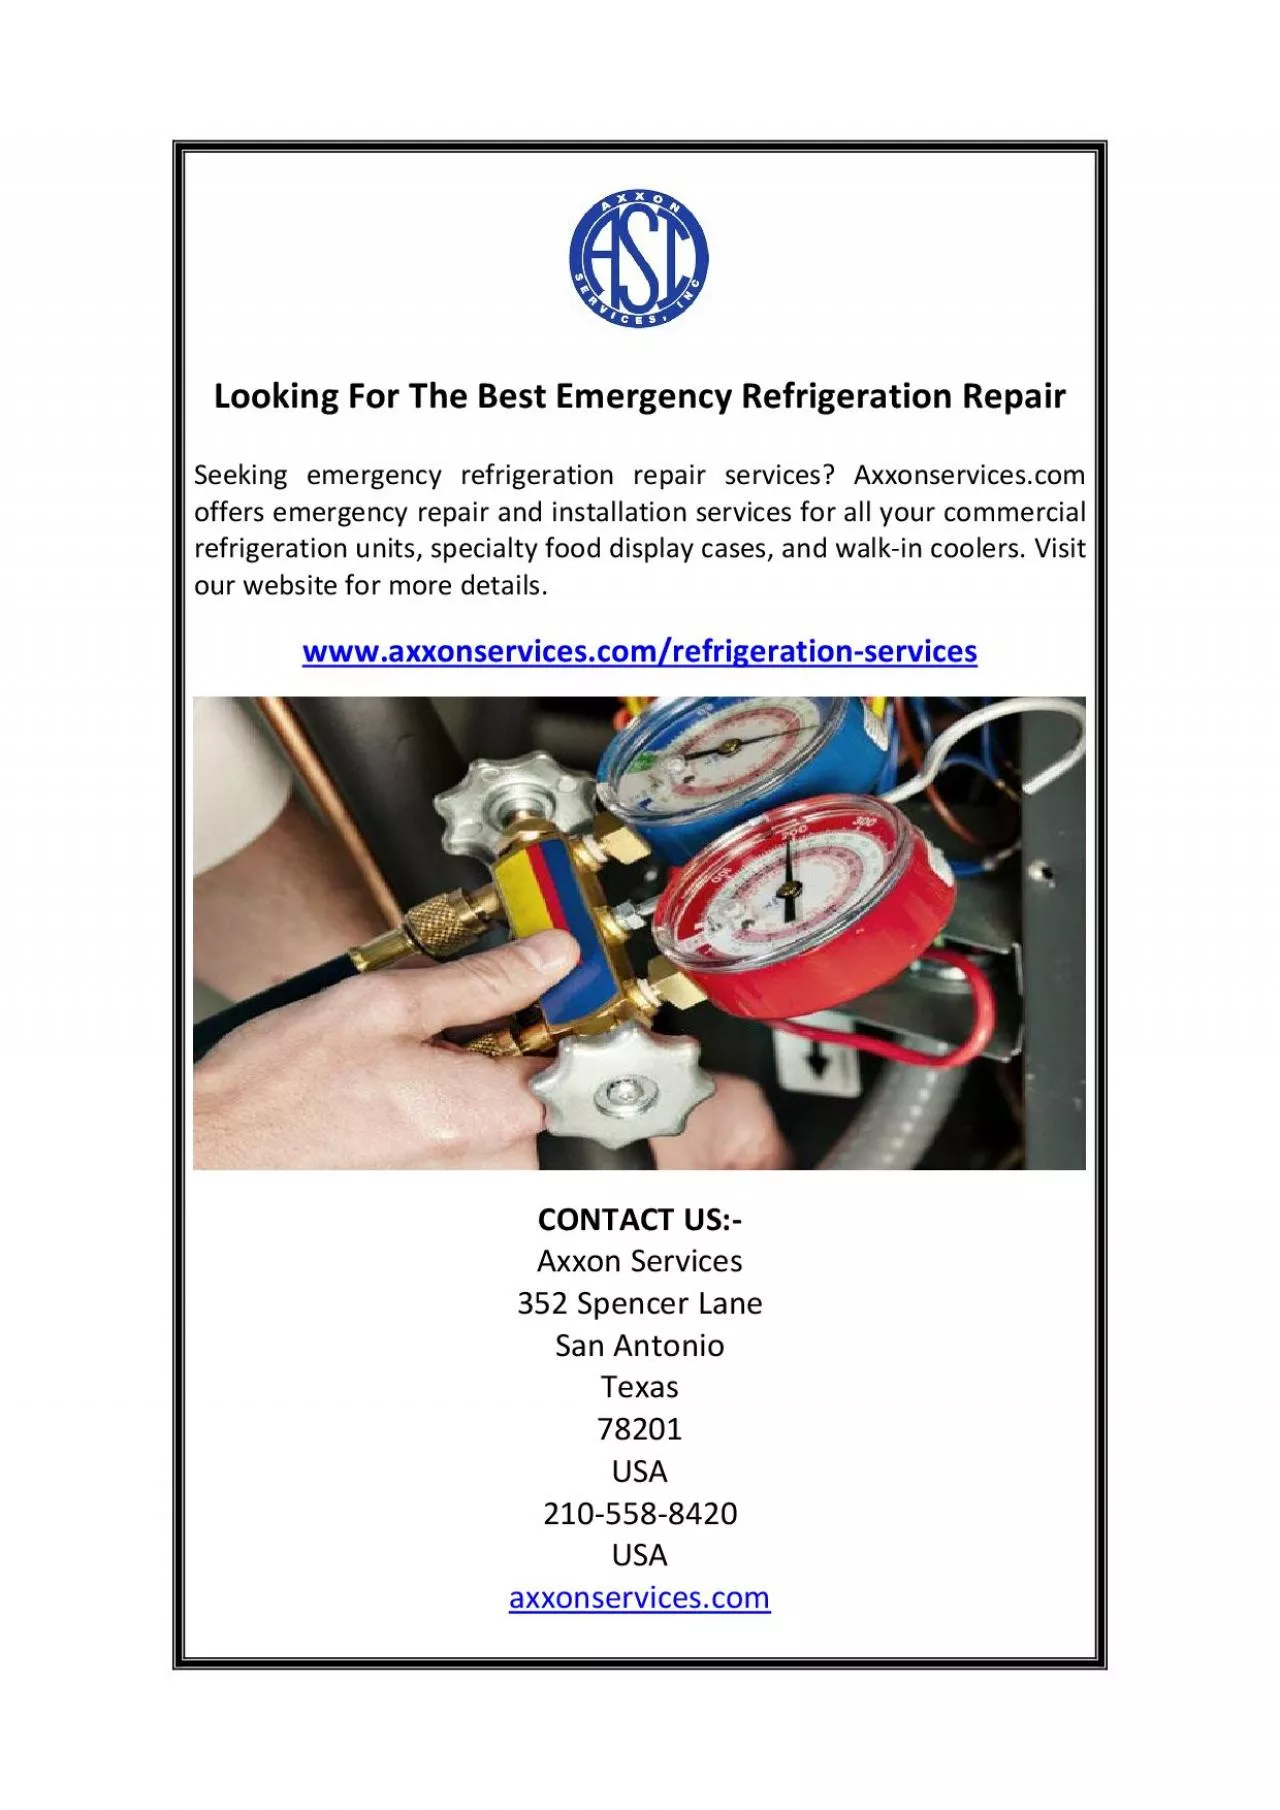 Looking For The Best Emergency Refrigeration Repair